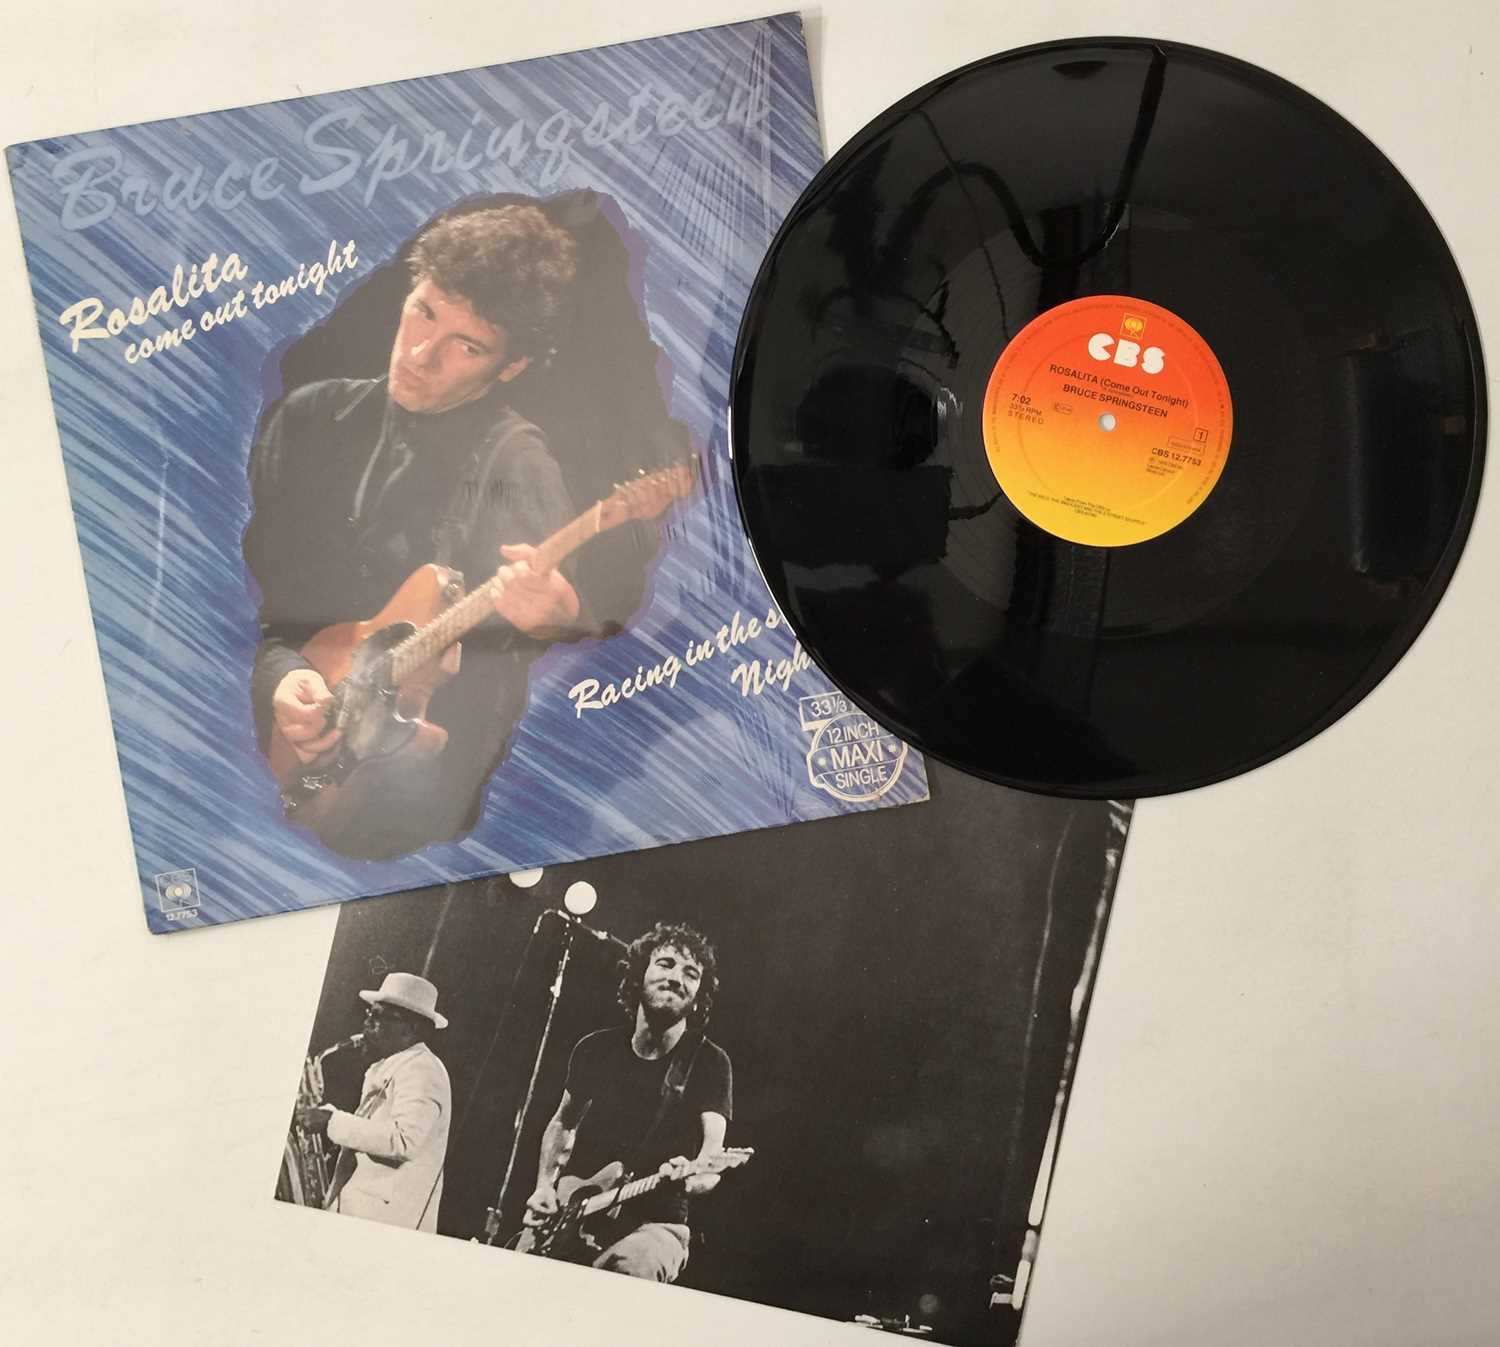 BRUCE SPRINGSTEEN - ROSALITA (COME OUT TONIGHT) 12" MAXI (COMPLETE ORIGINAL EU COPY WITH POSTER - CB - Image 4 of 6